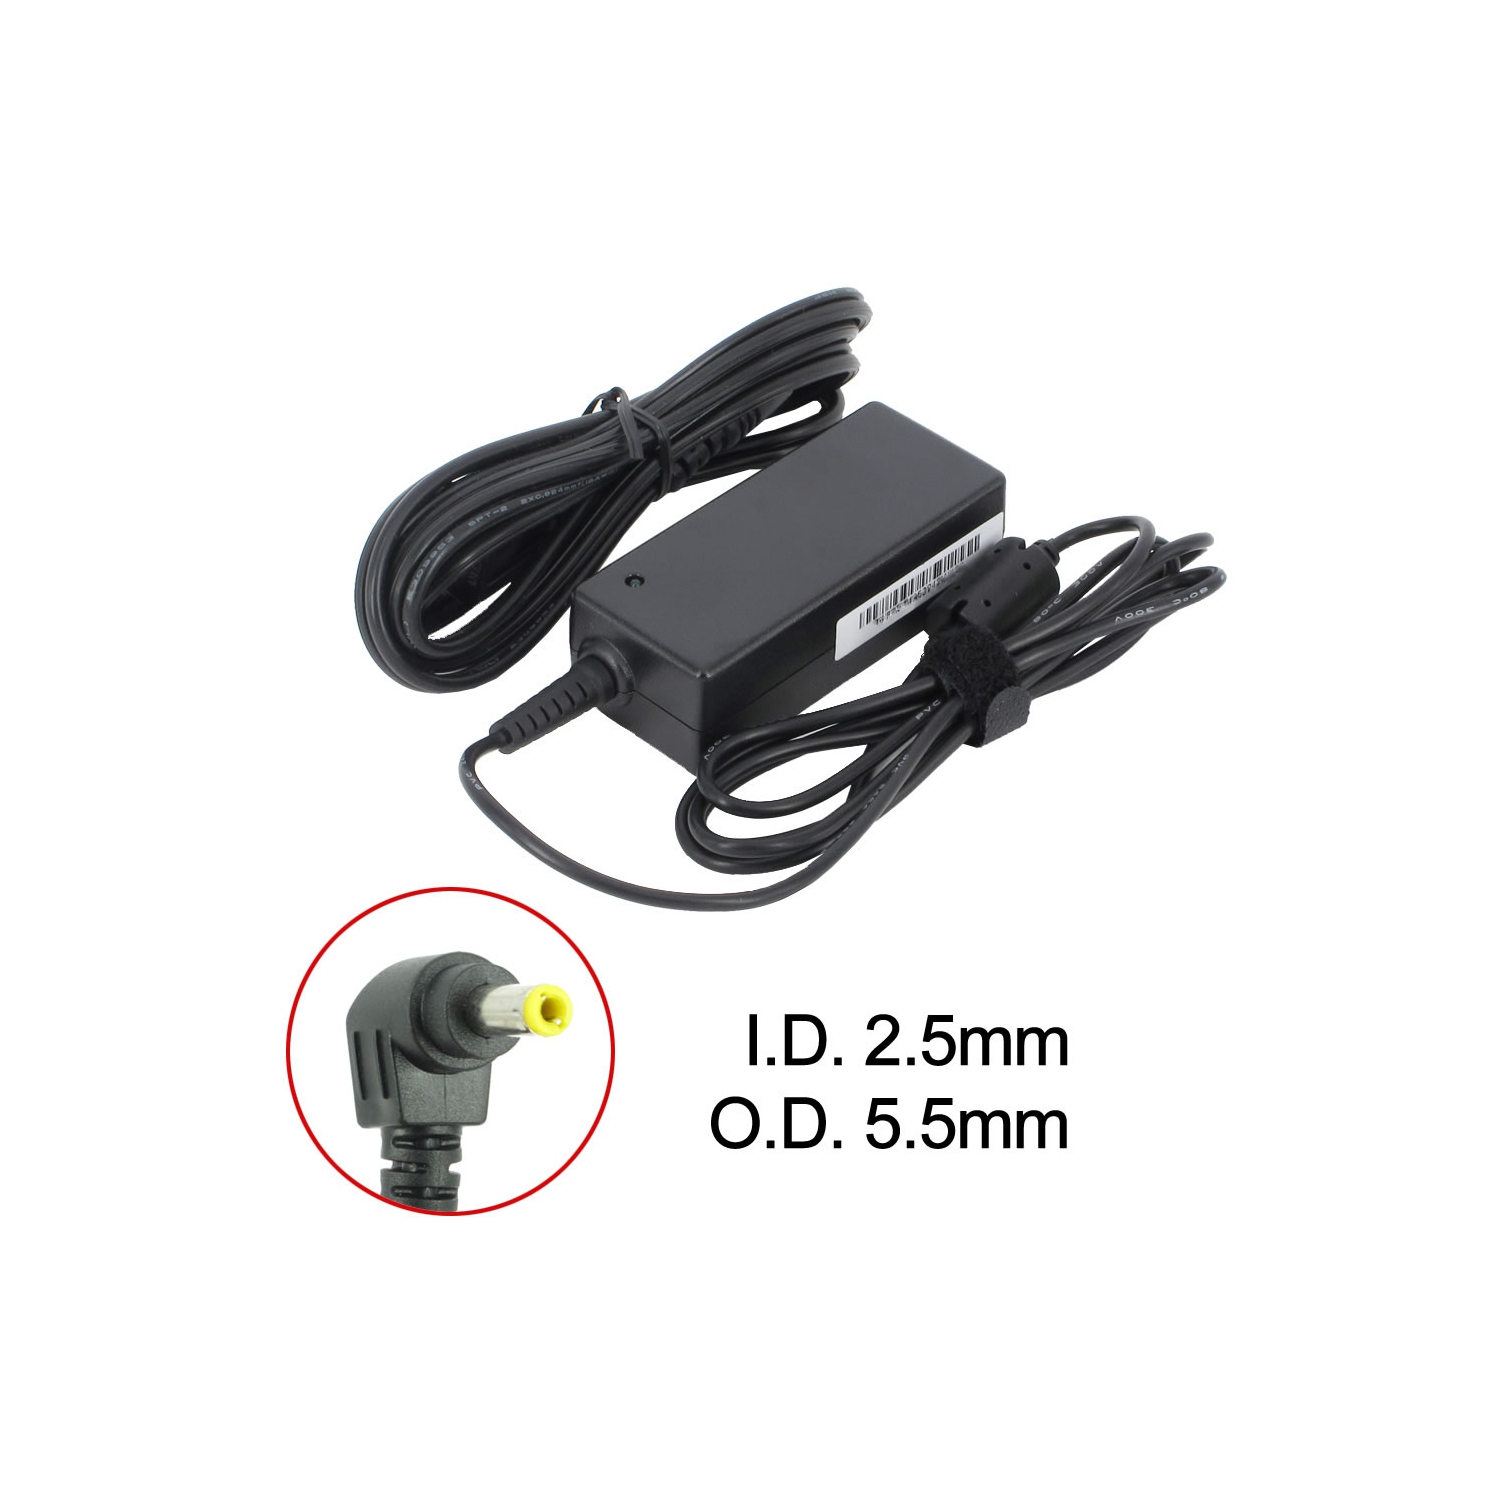 BattDepot: New Laptop AC Adapter for Lenovo 41R4455, ADP-40NH B, 31038046, 41R4447, 45K2201, 55Y9367, 57Y6367